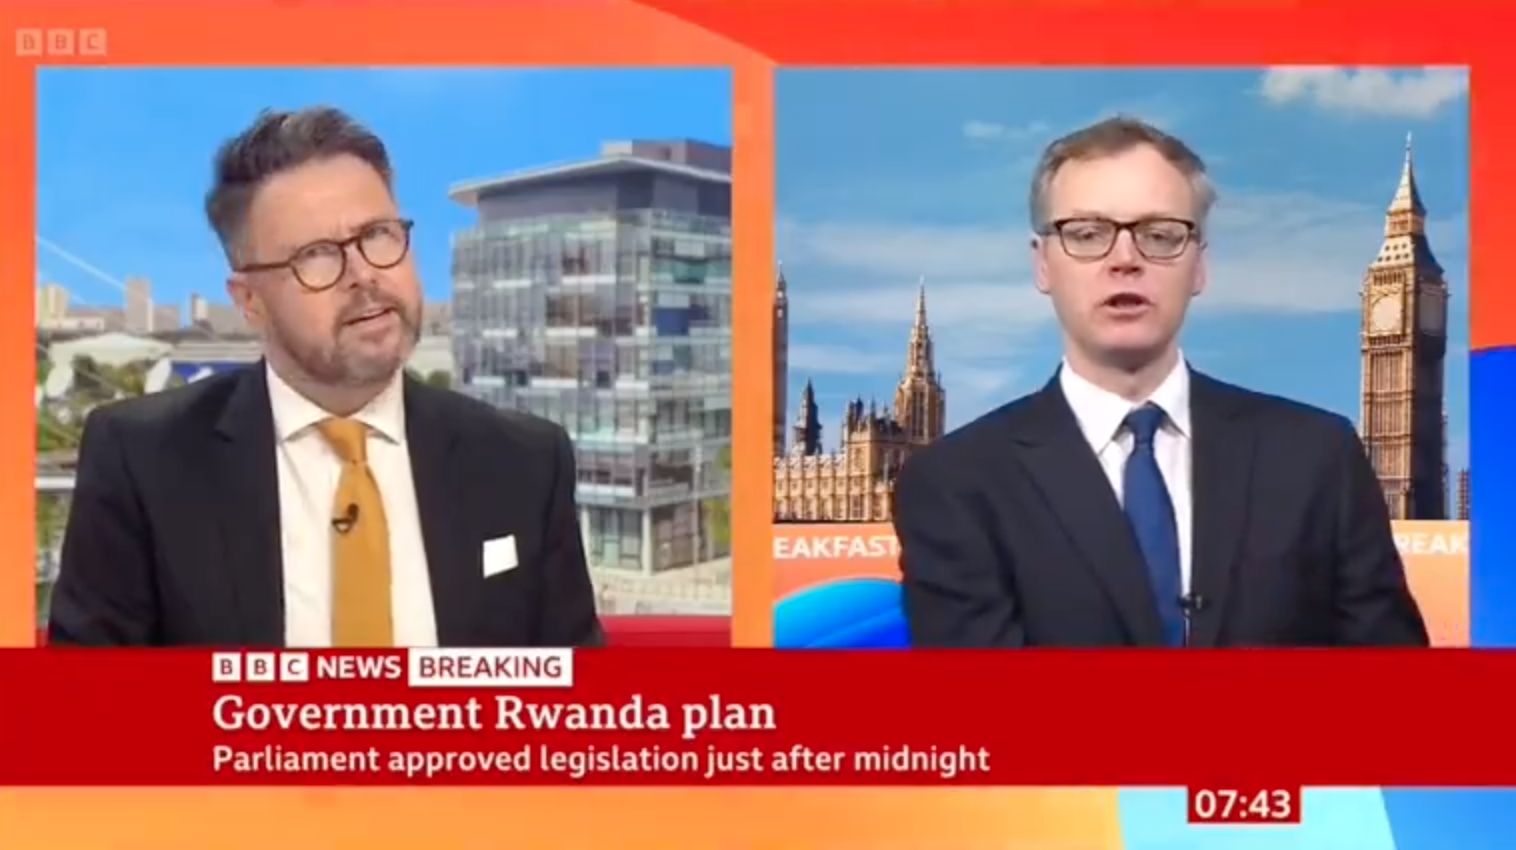 They Are Not Deterred: BBC Breakfast Host Confronts Tory Minister On Rwanda Plan With Live Footage Of Migrant Channel Crossing [Video]